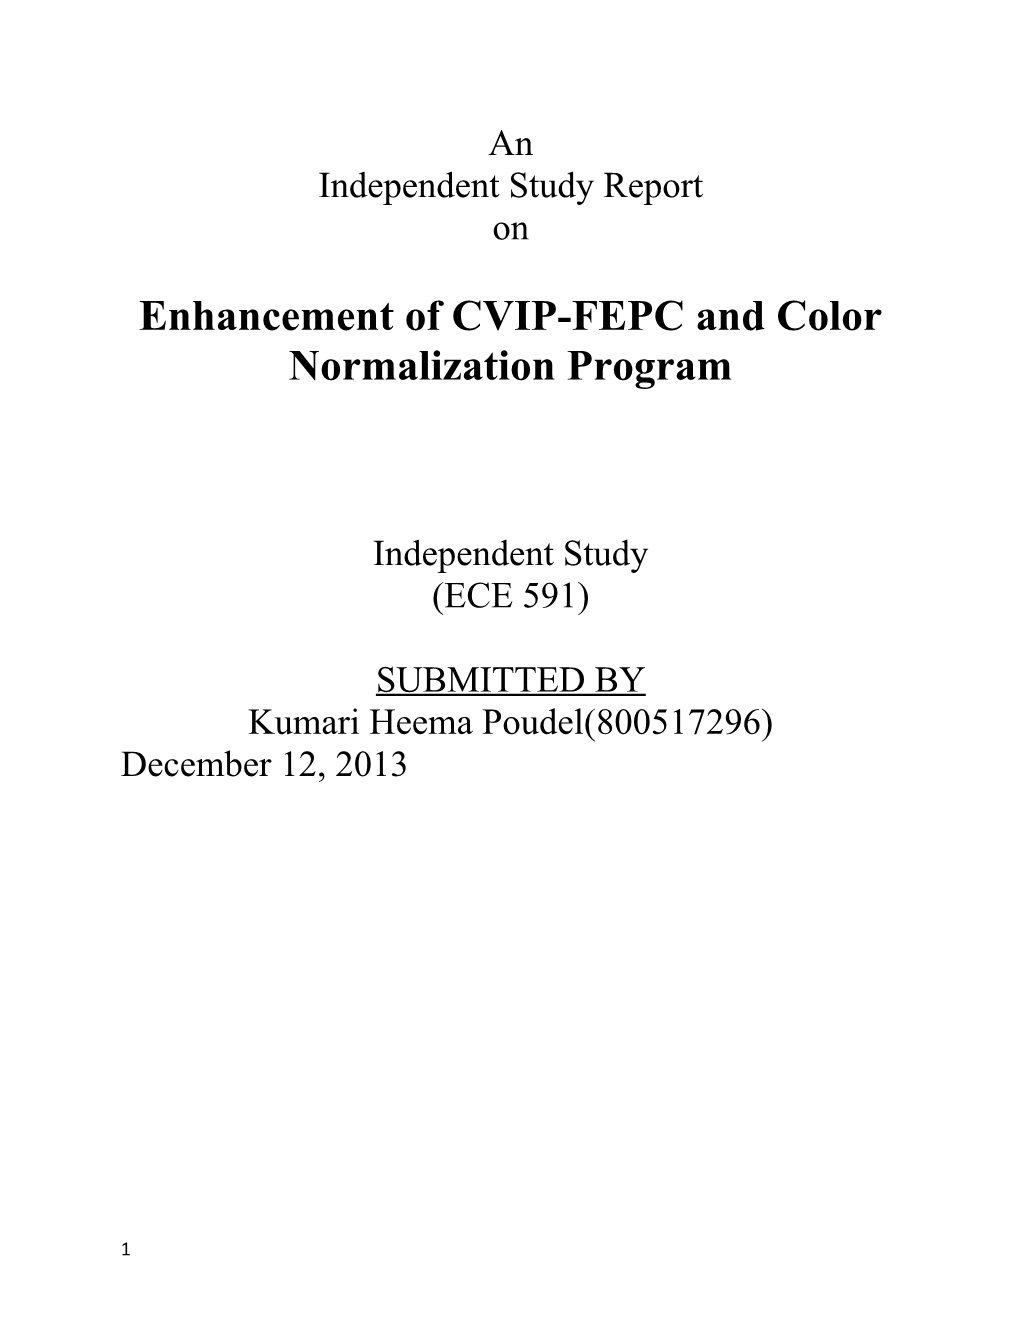 Enhancement of CVIP-FEPC and Color Normalization Program